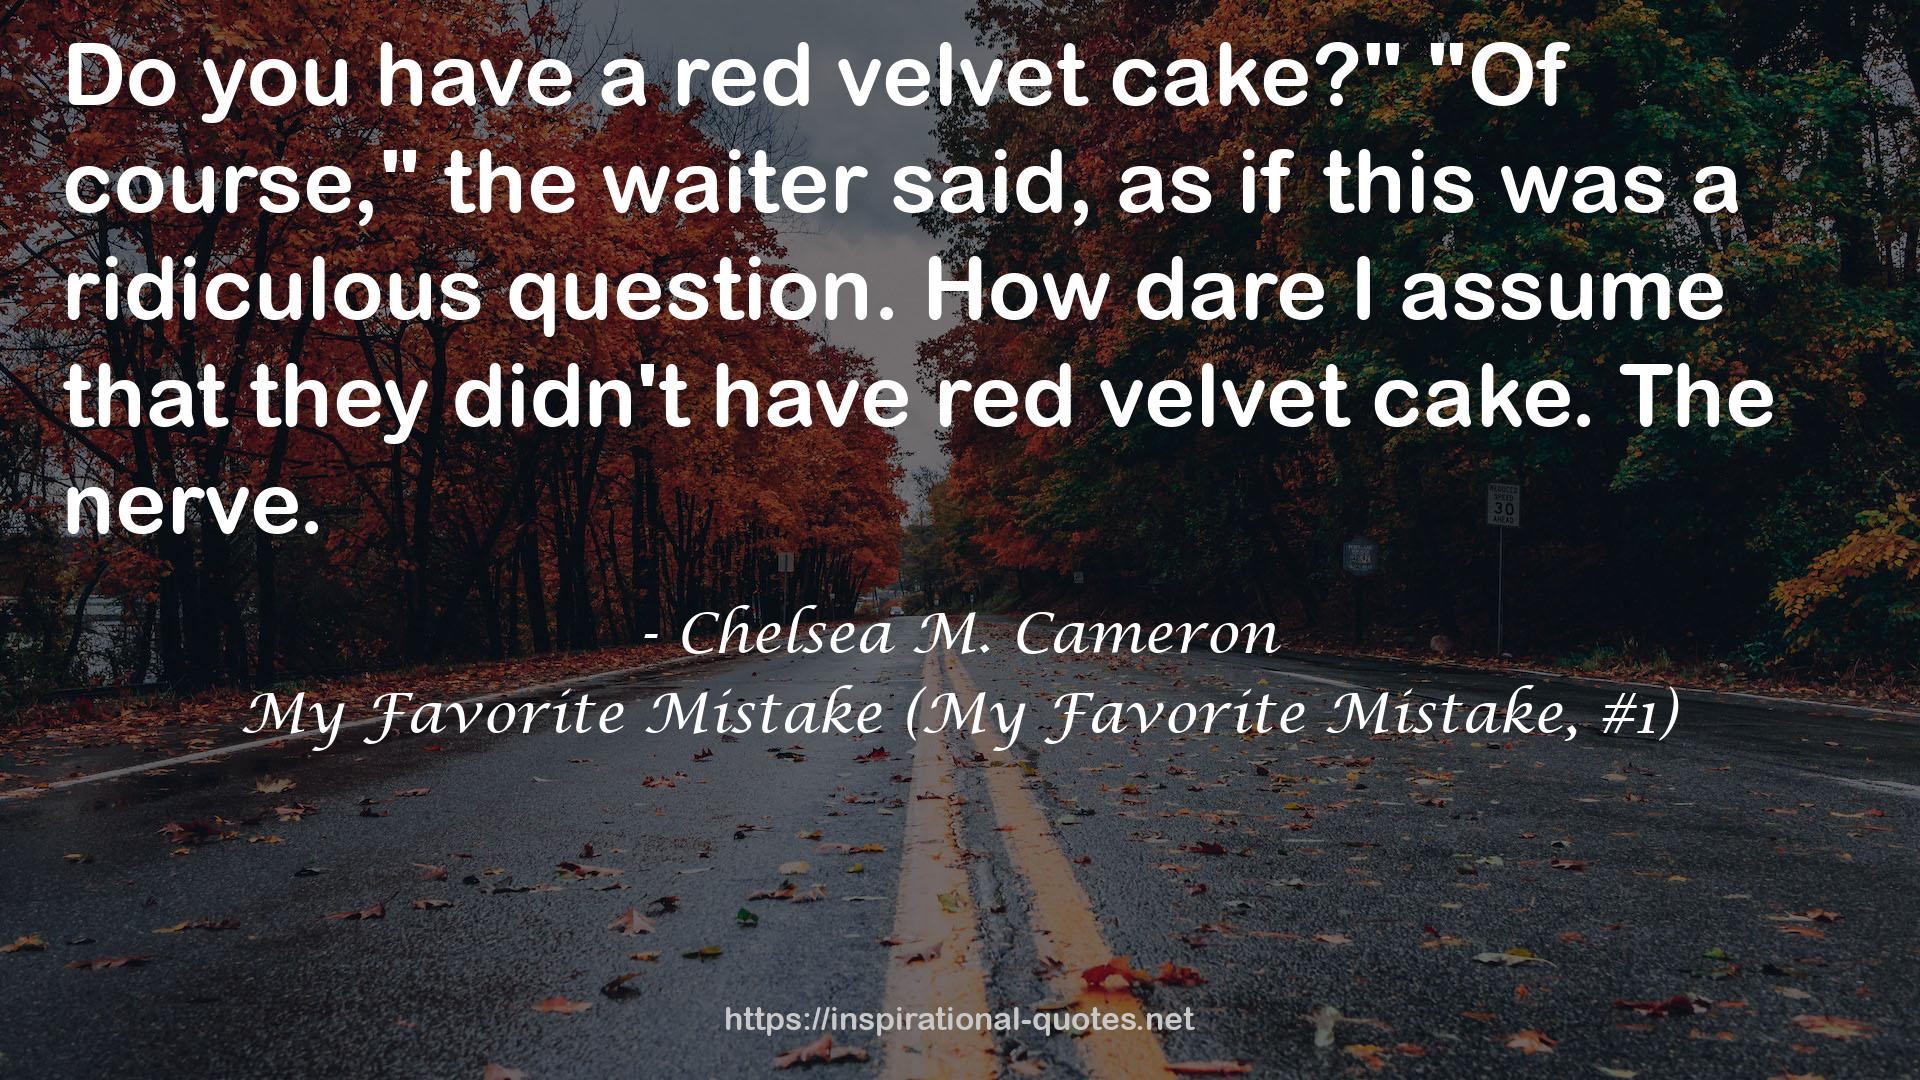 My Favorite Mistake (My Favorite Mistake, #1) QUOTES